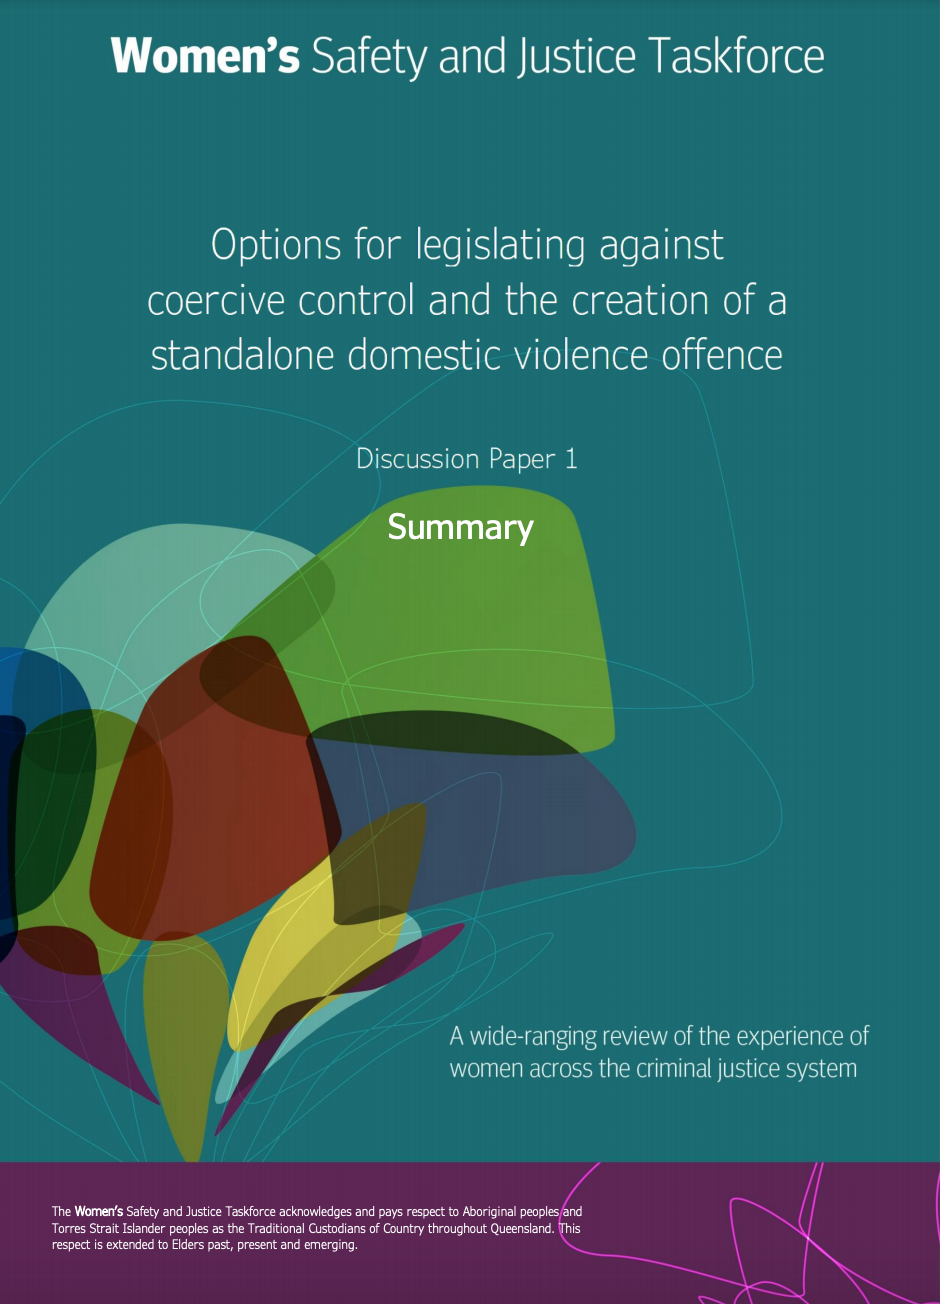 Options for legislating against coercive control and more